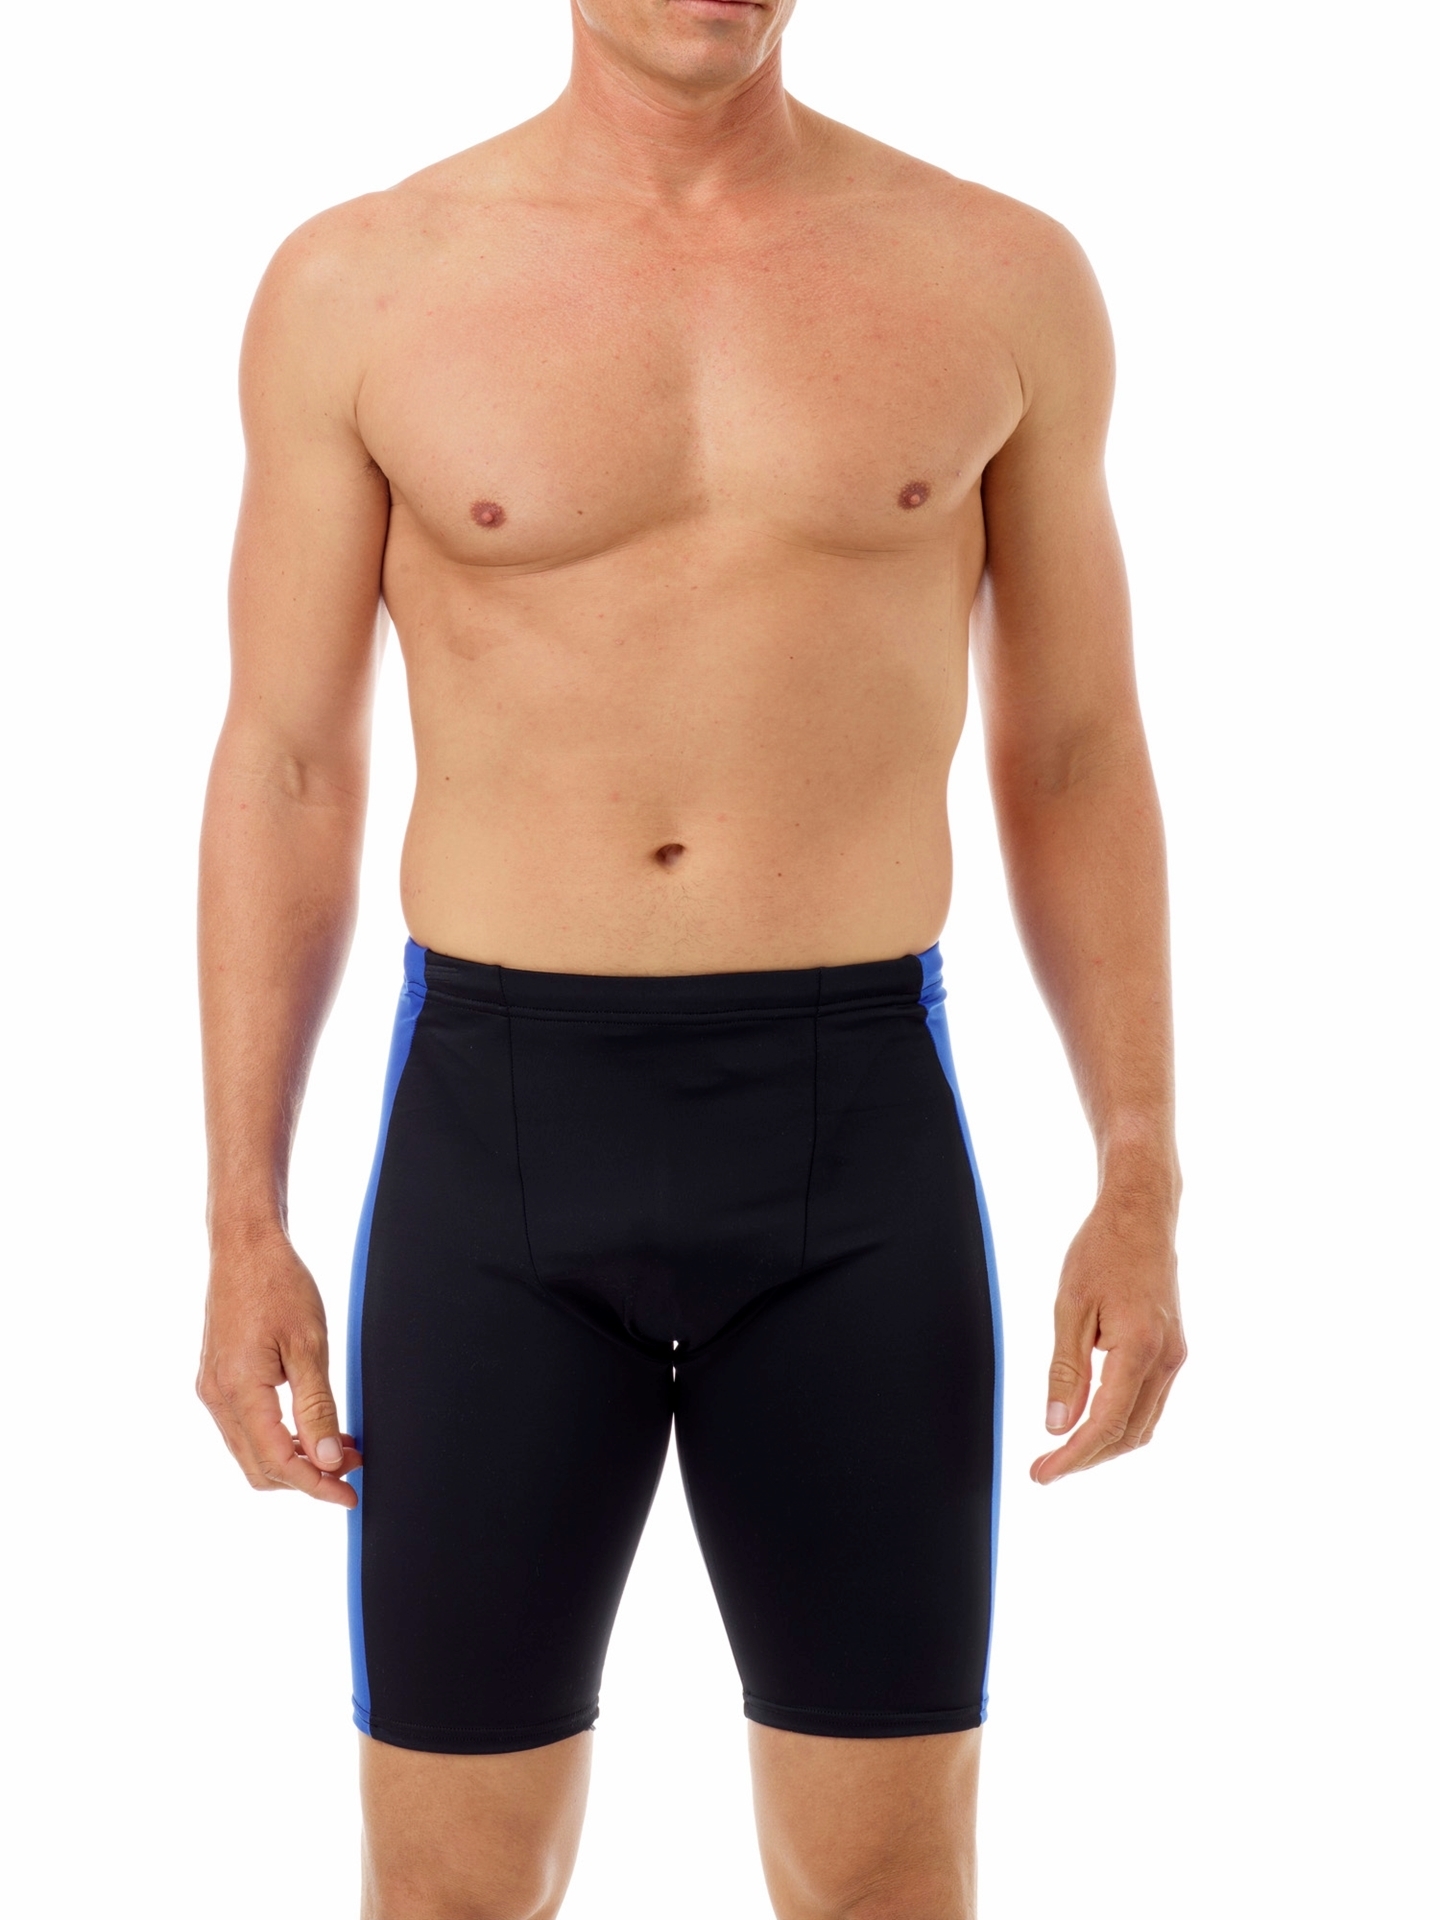 Men's Compression Workout and Swim Shorts